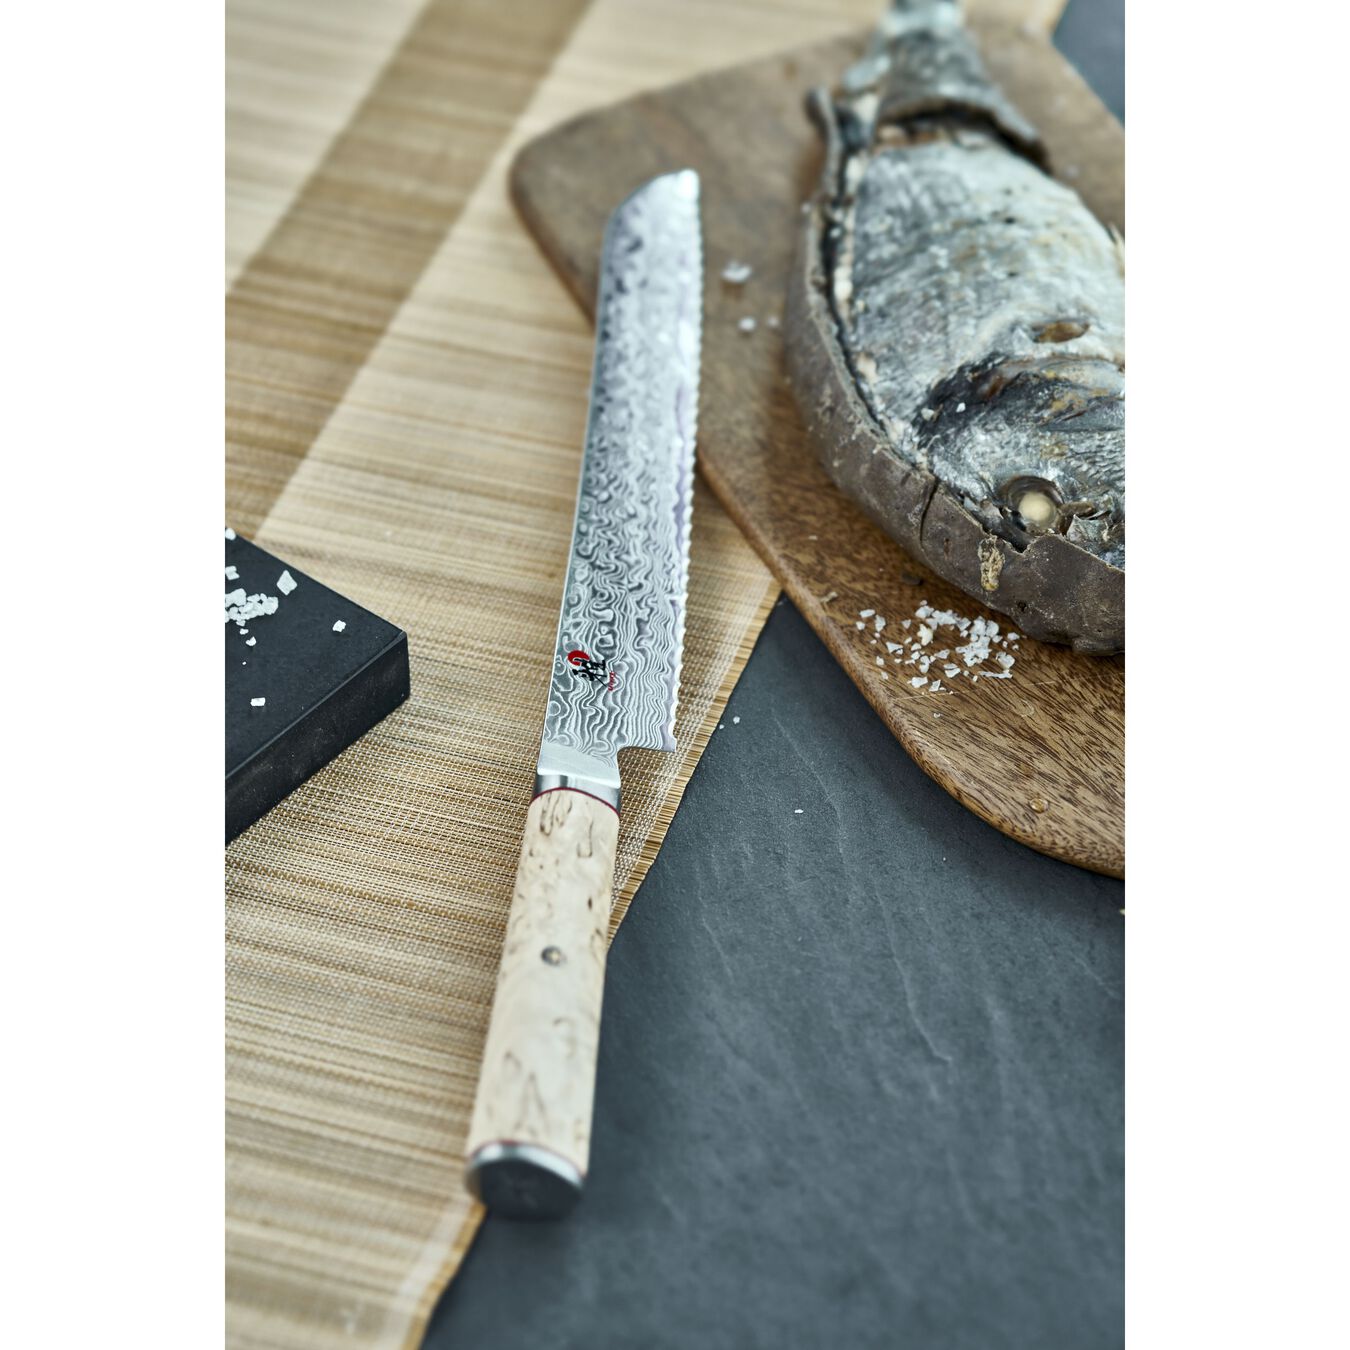 9 inch Bread knife,,large 2